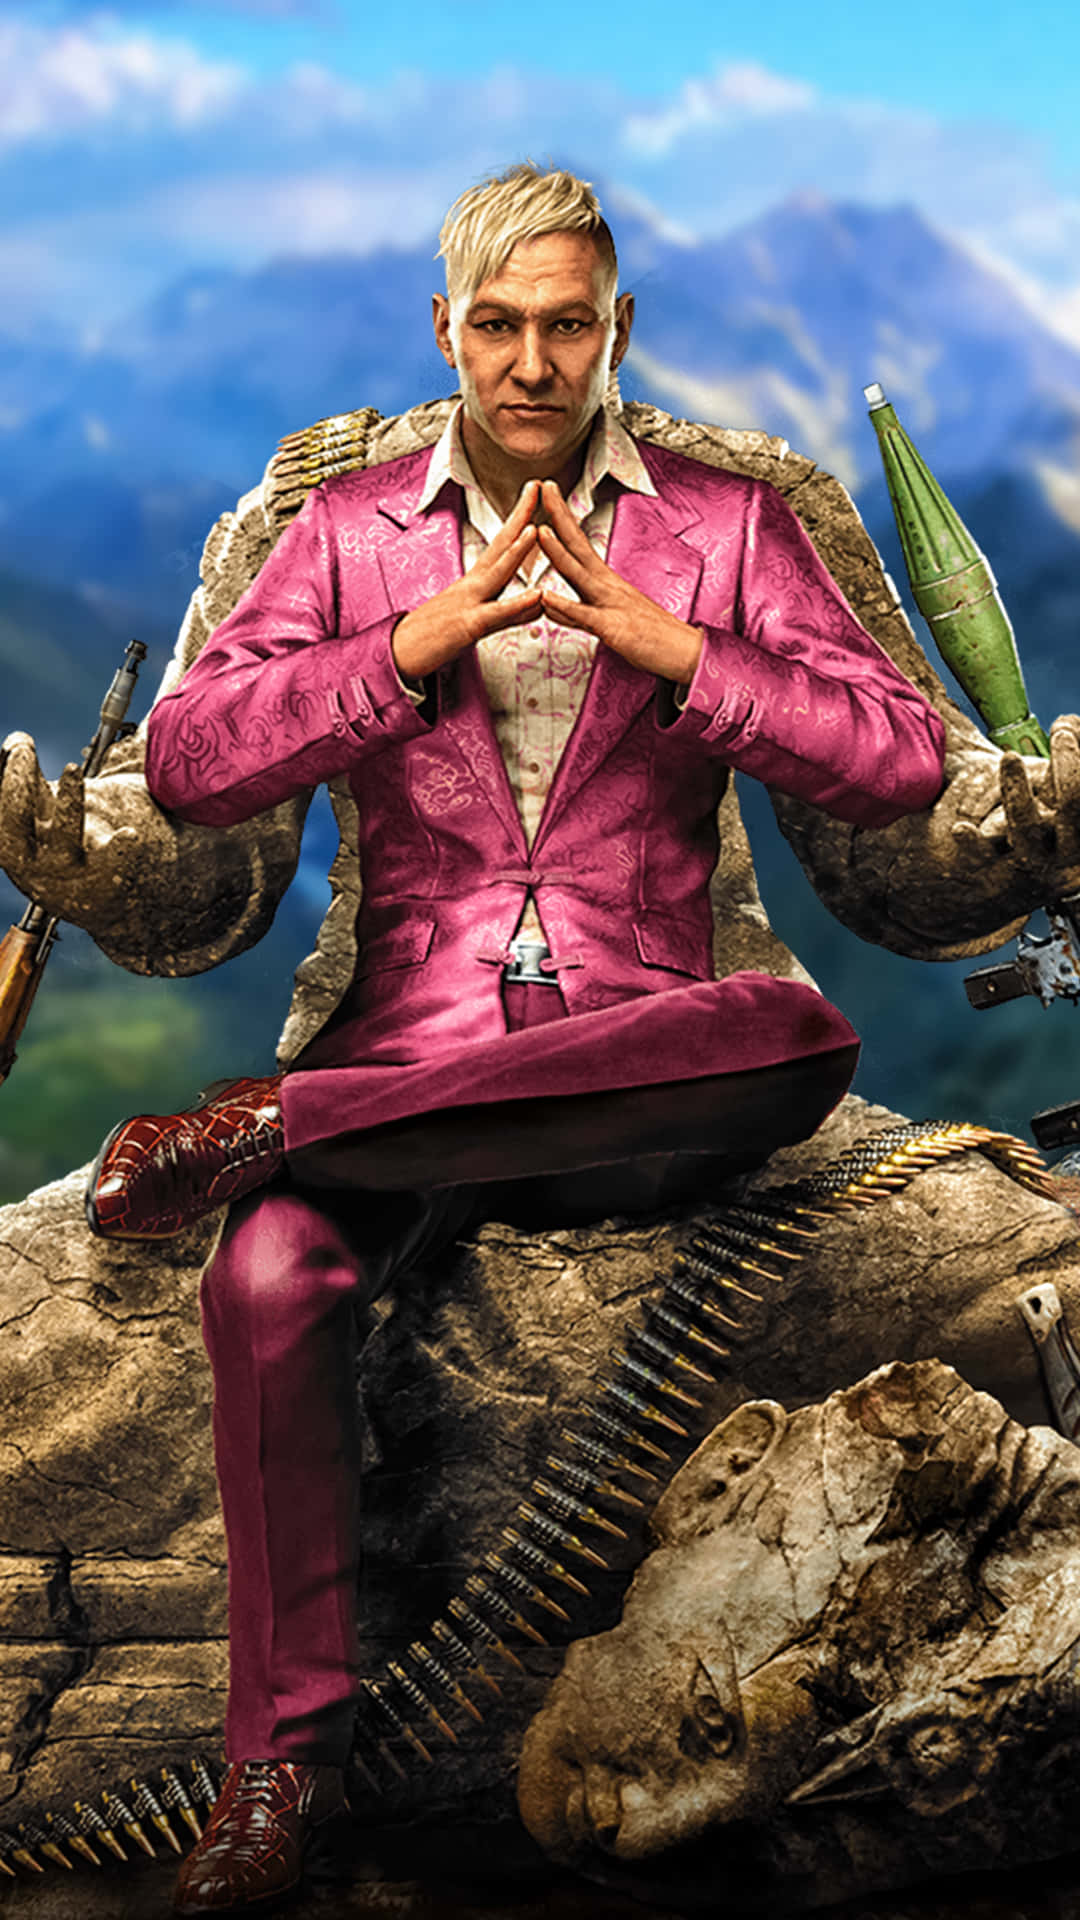 Get lost in the immersive world of Far Cry 4 on your new Iphone Xs.